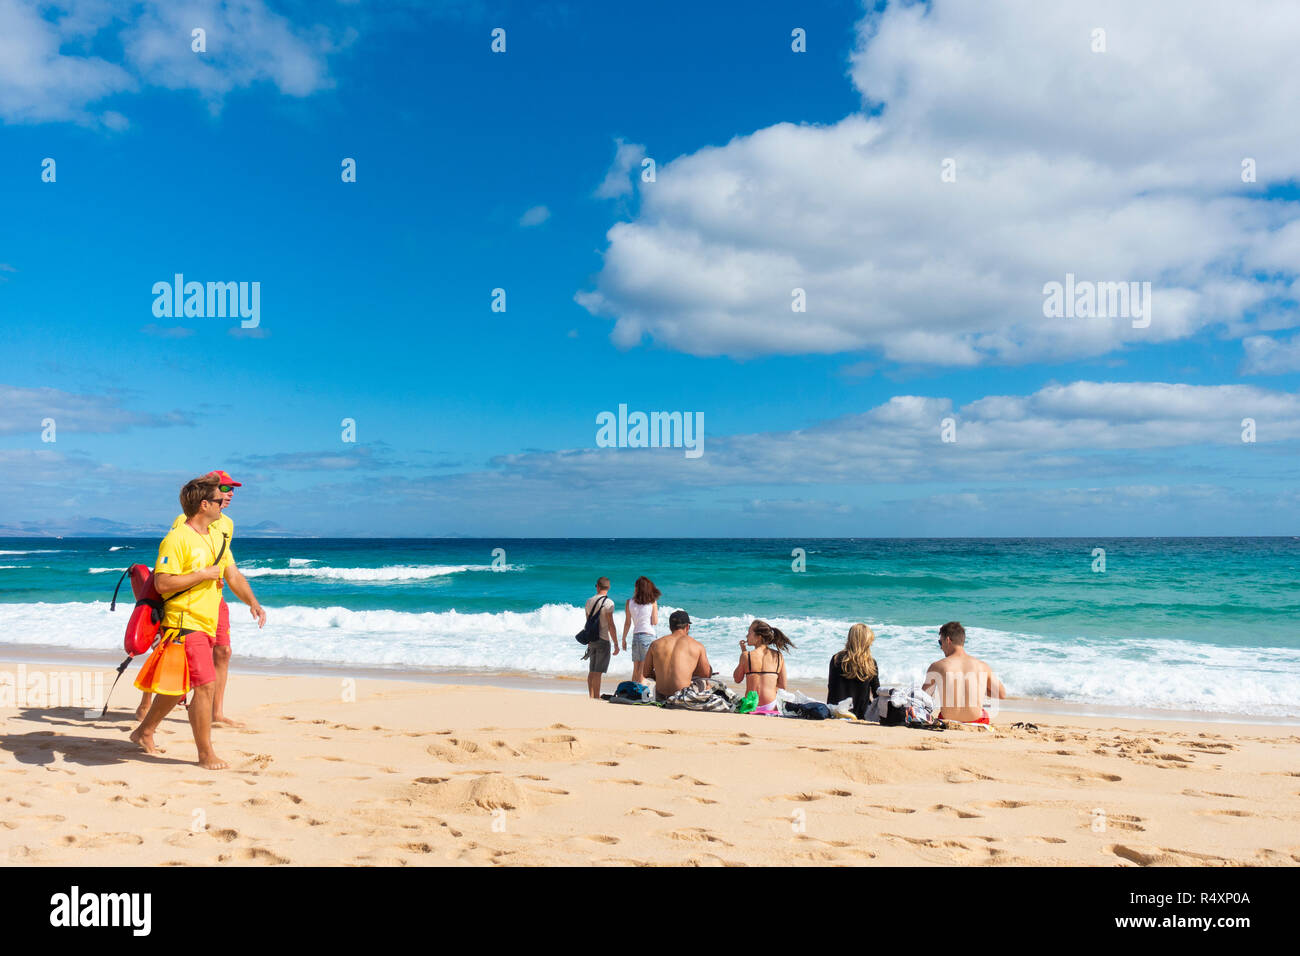 Lifeguards and tourists on El Burro beach at Corralejo on Fuerteventura,  Canary Islands, Spain Stock Photo - Alamy